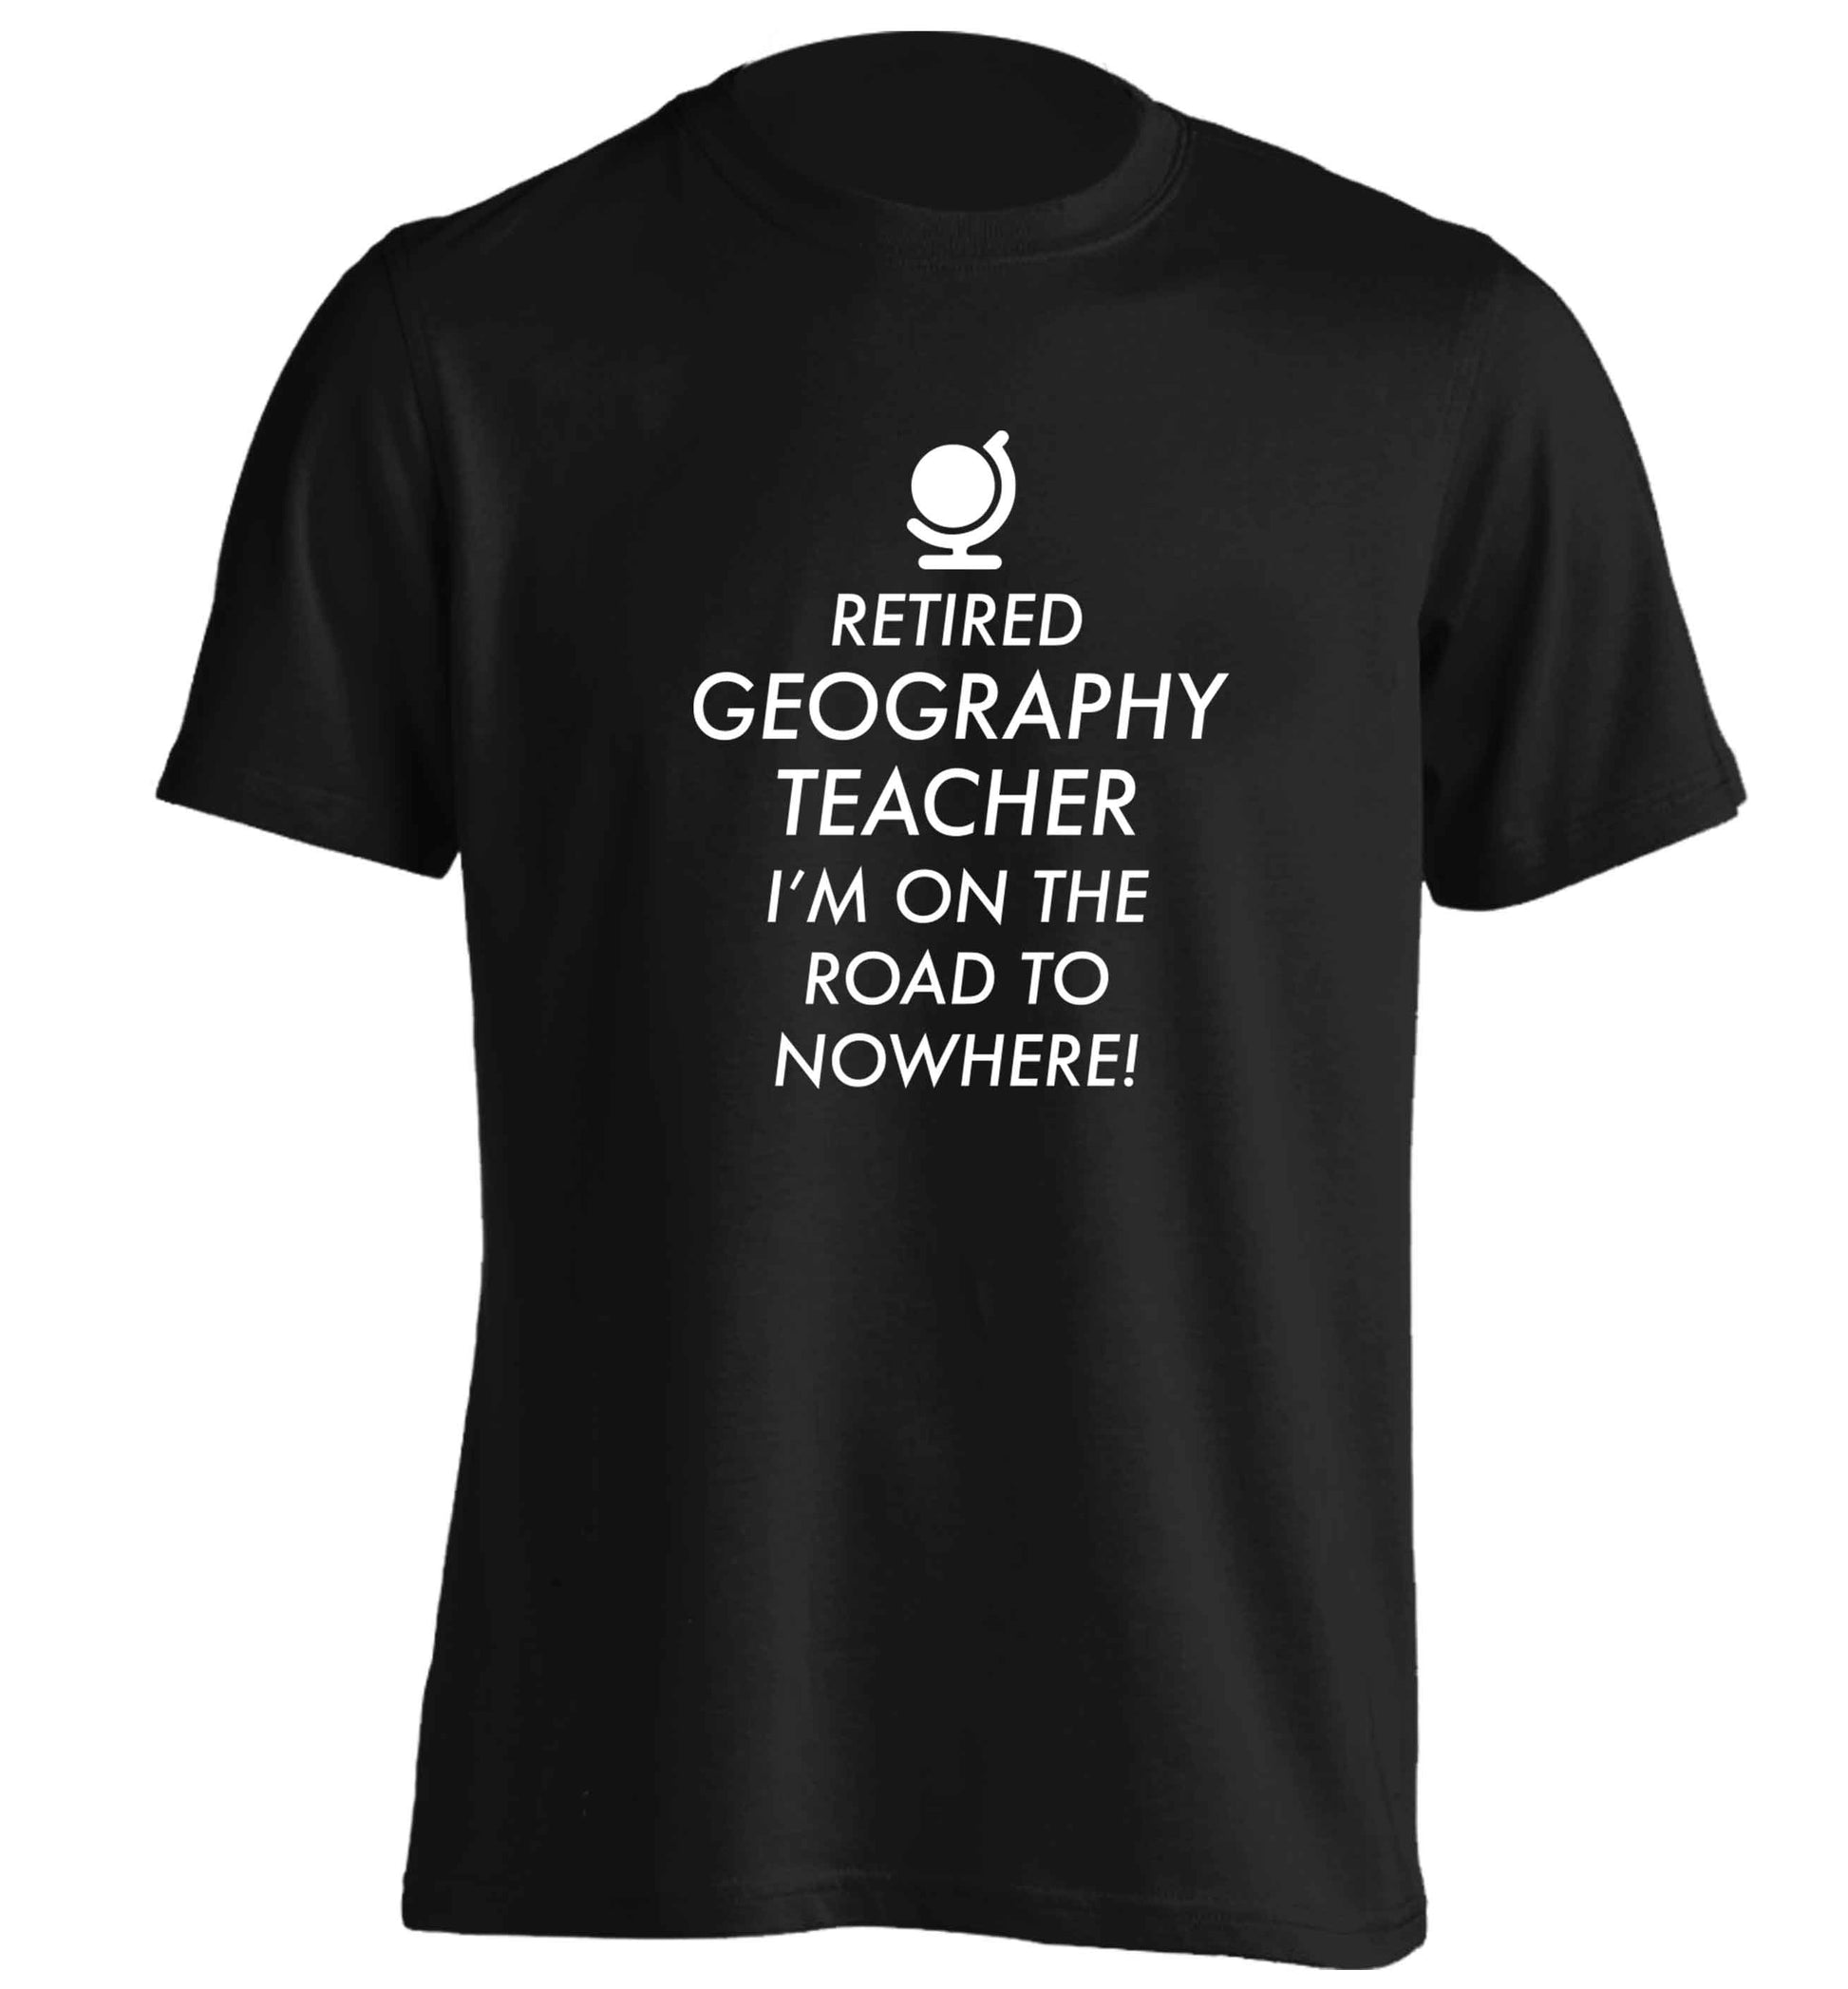 Retired geography teacher I'm on the road to nowhere adults unisex black Tshirt 2XL